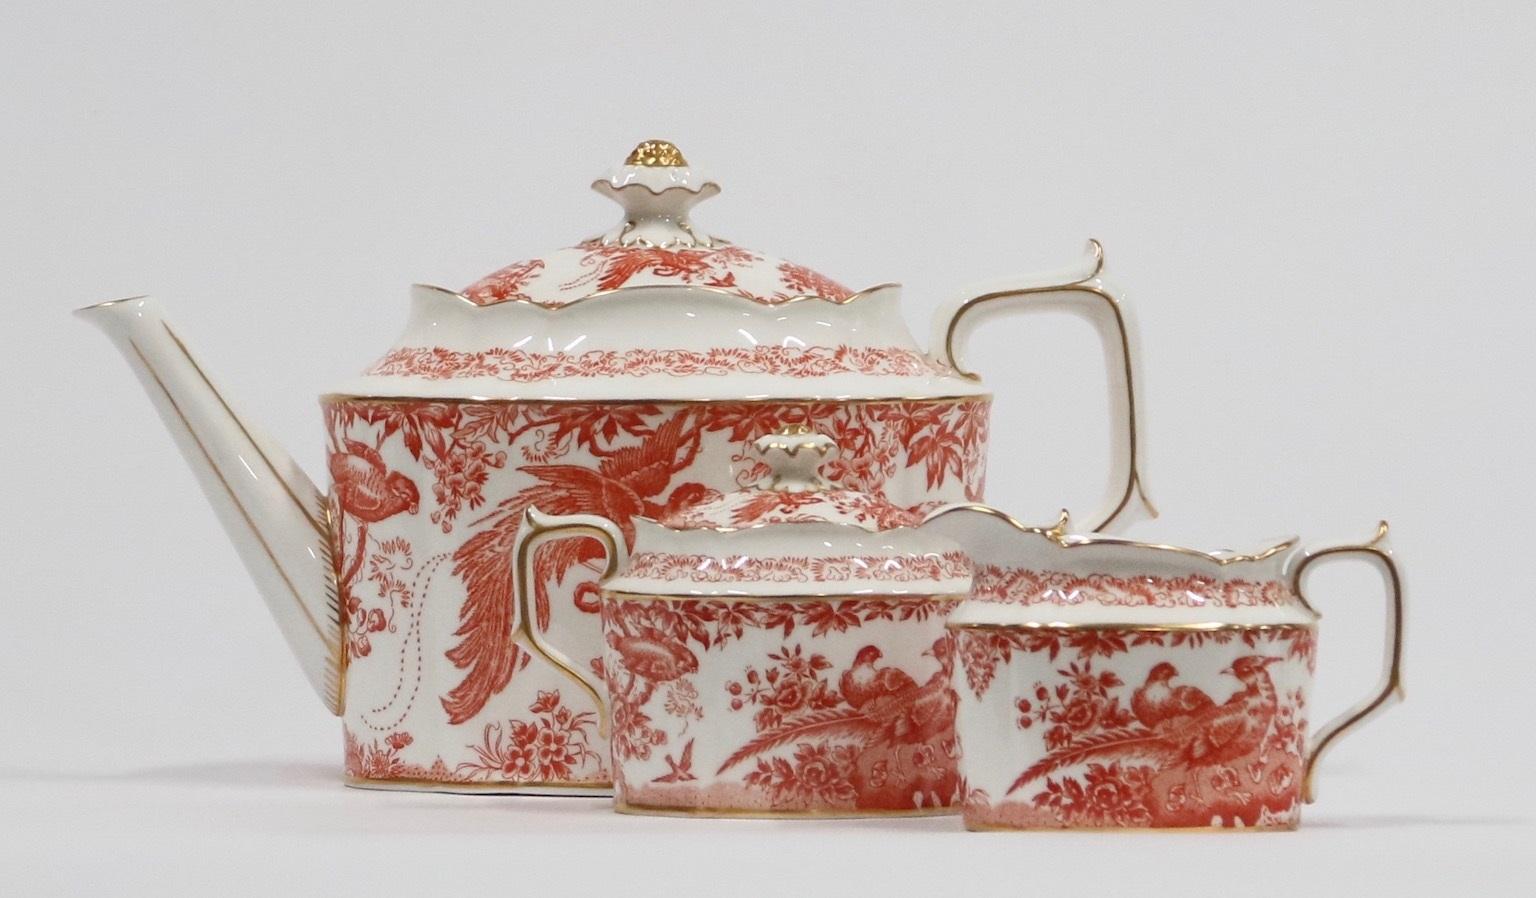 English bone china tea set of three pieces by Royal Crown Derby, “Red Aves” design, with tea pot, sugar bowl with lid and creamer. Never used and in excellent vintage condition.
Measures: Tea pot: 11.5 in (29 cm) W. x 5.5 in (14 cm) D. x 7 in ( 18